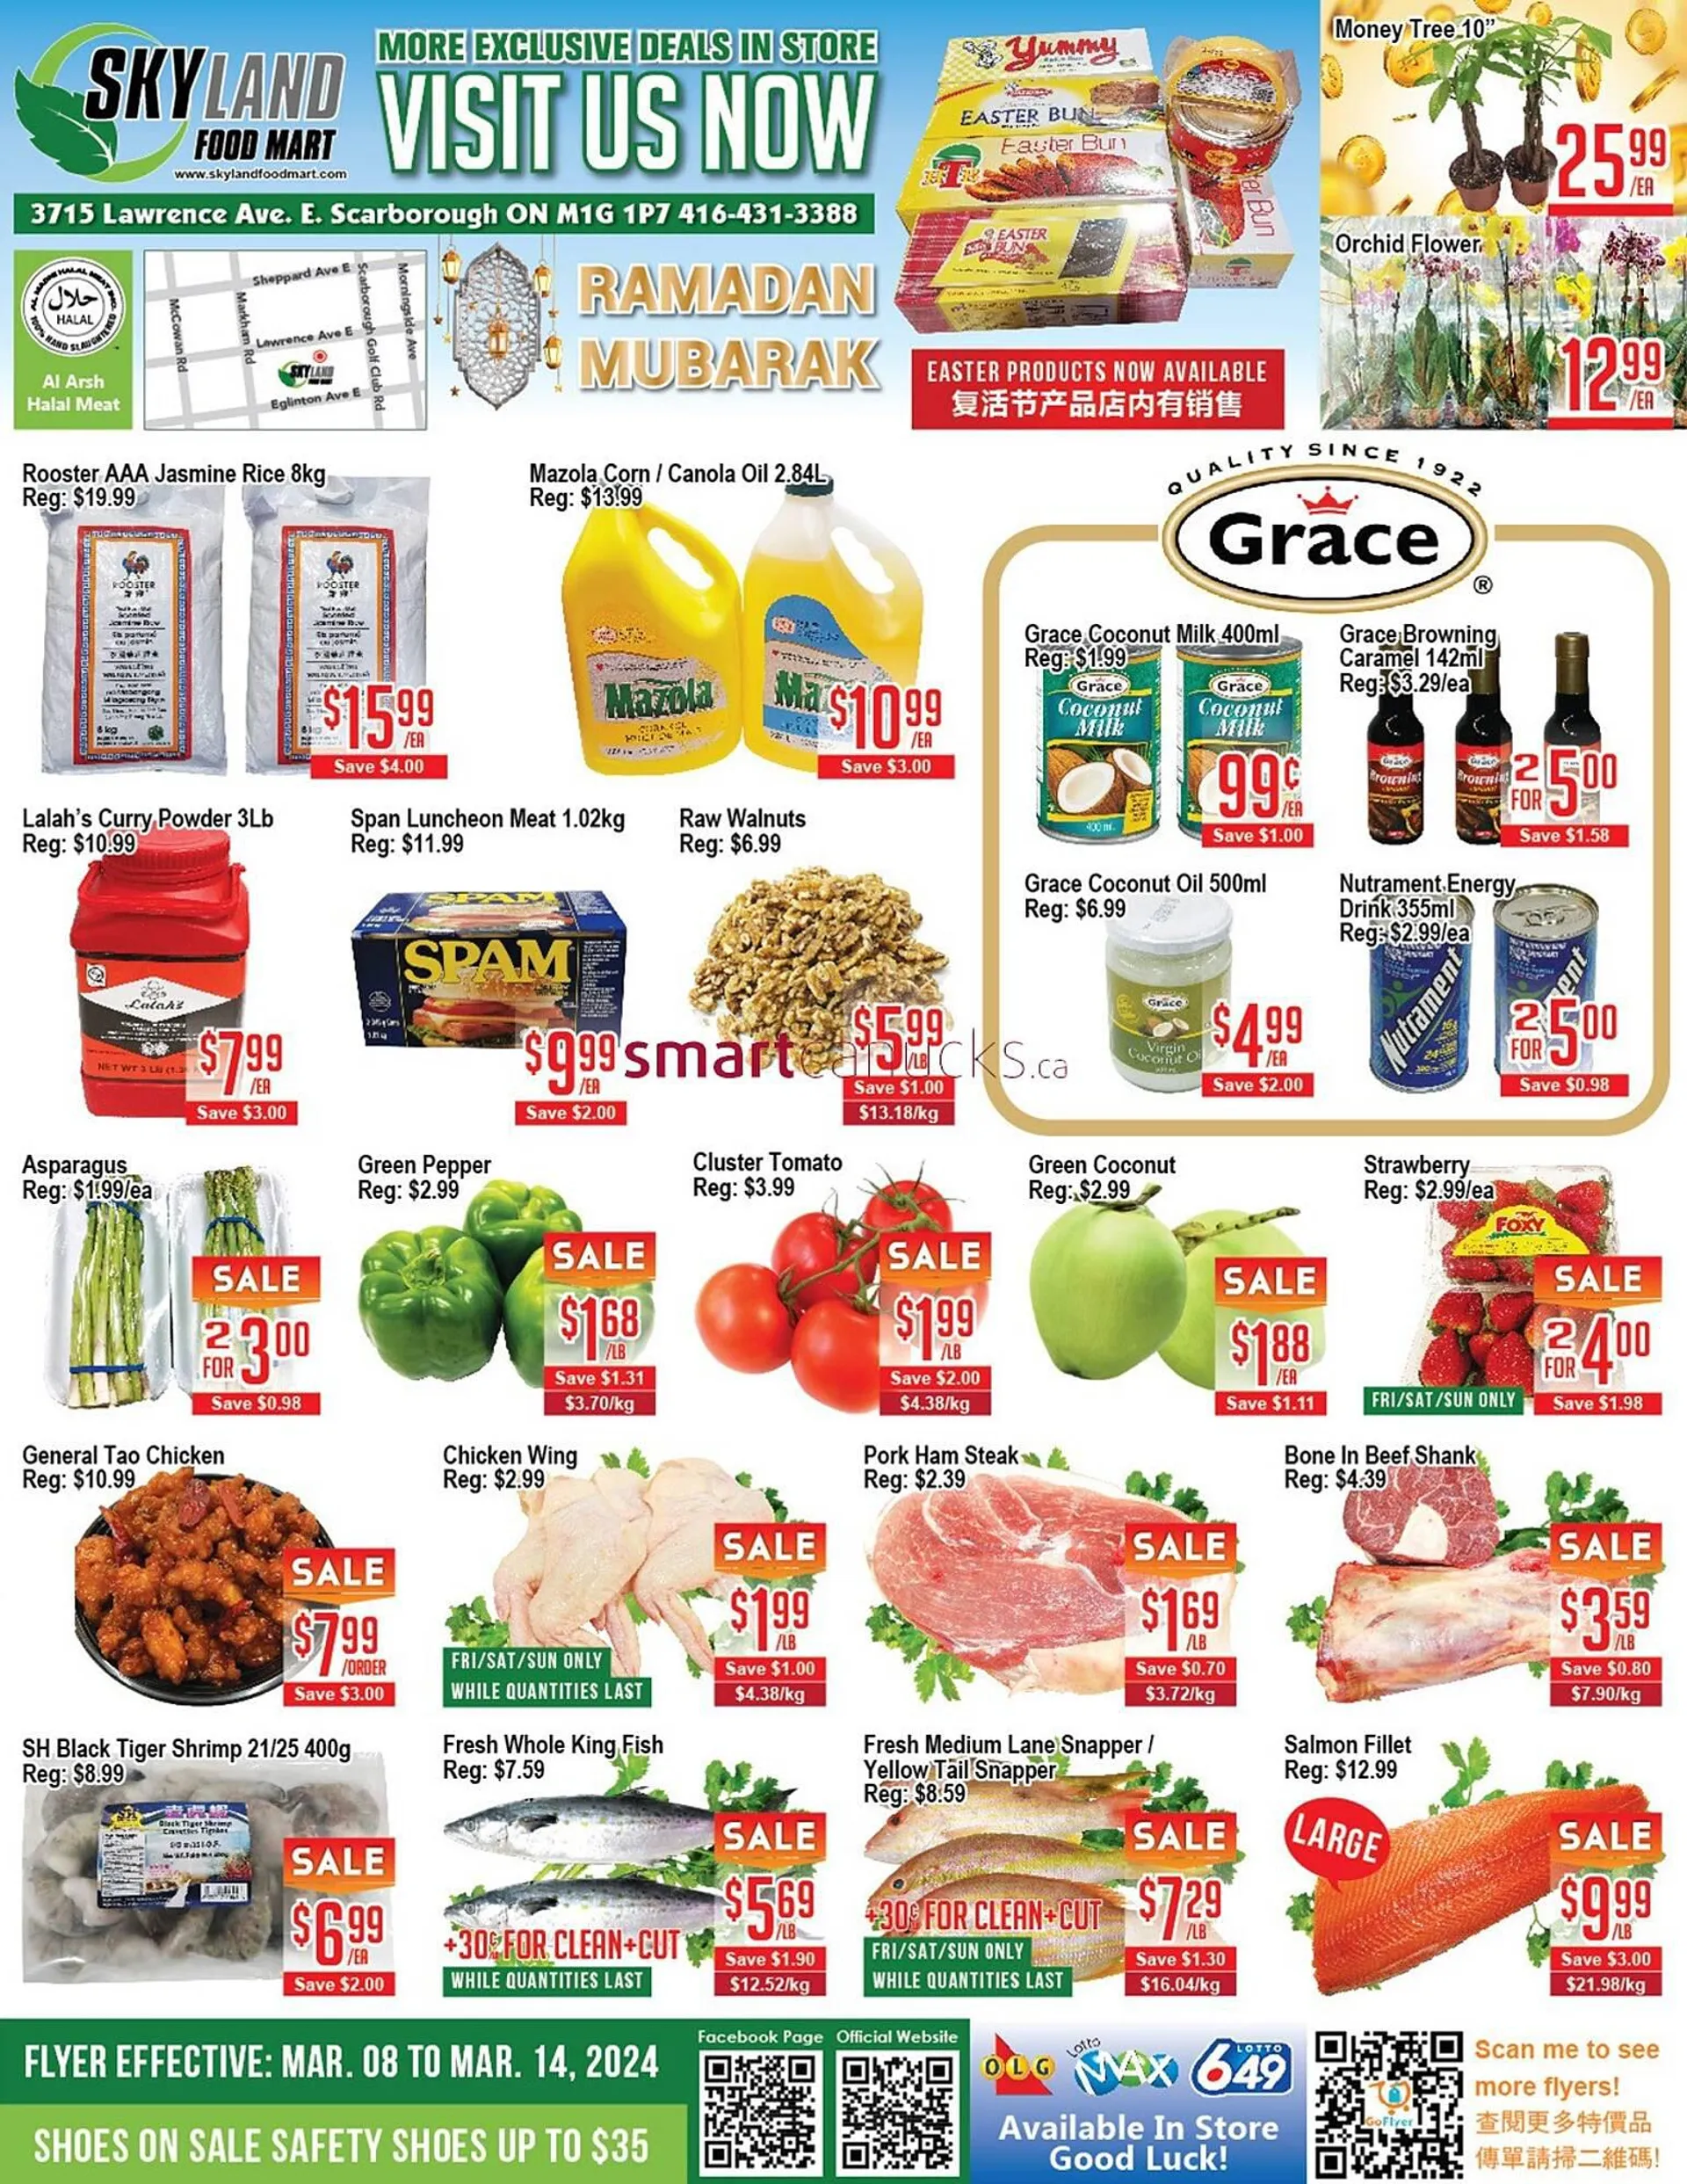 Skyland Foodmart flyer from March 8 to March 14 2024 - flyer page 1